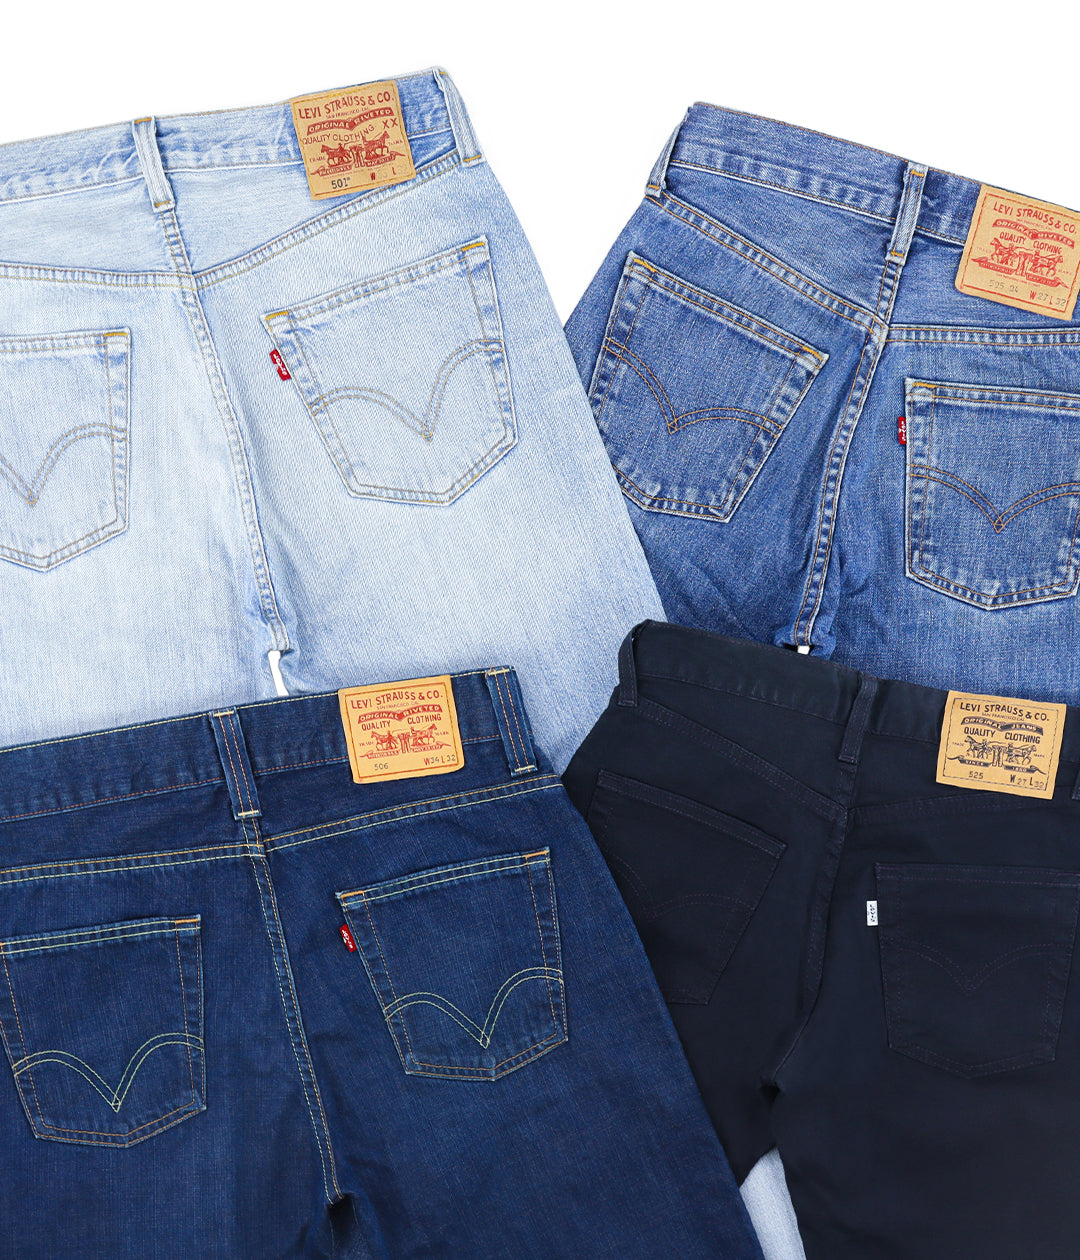 Best Selection of Assorted Levis Jeans & Trousers